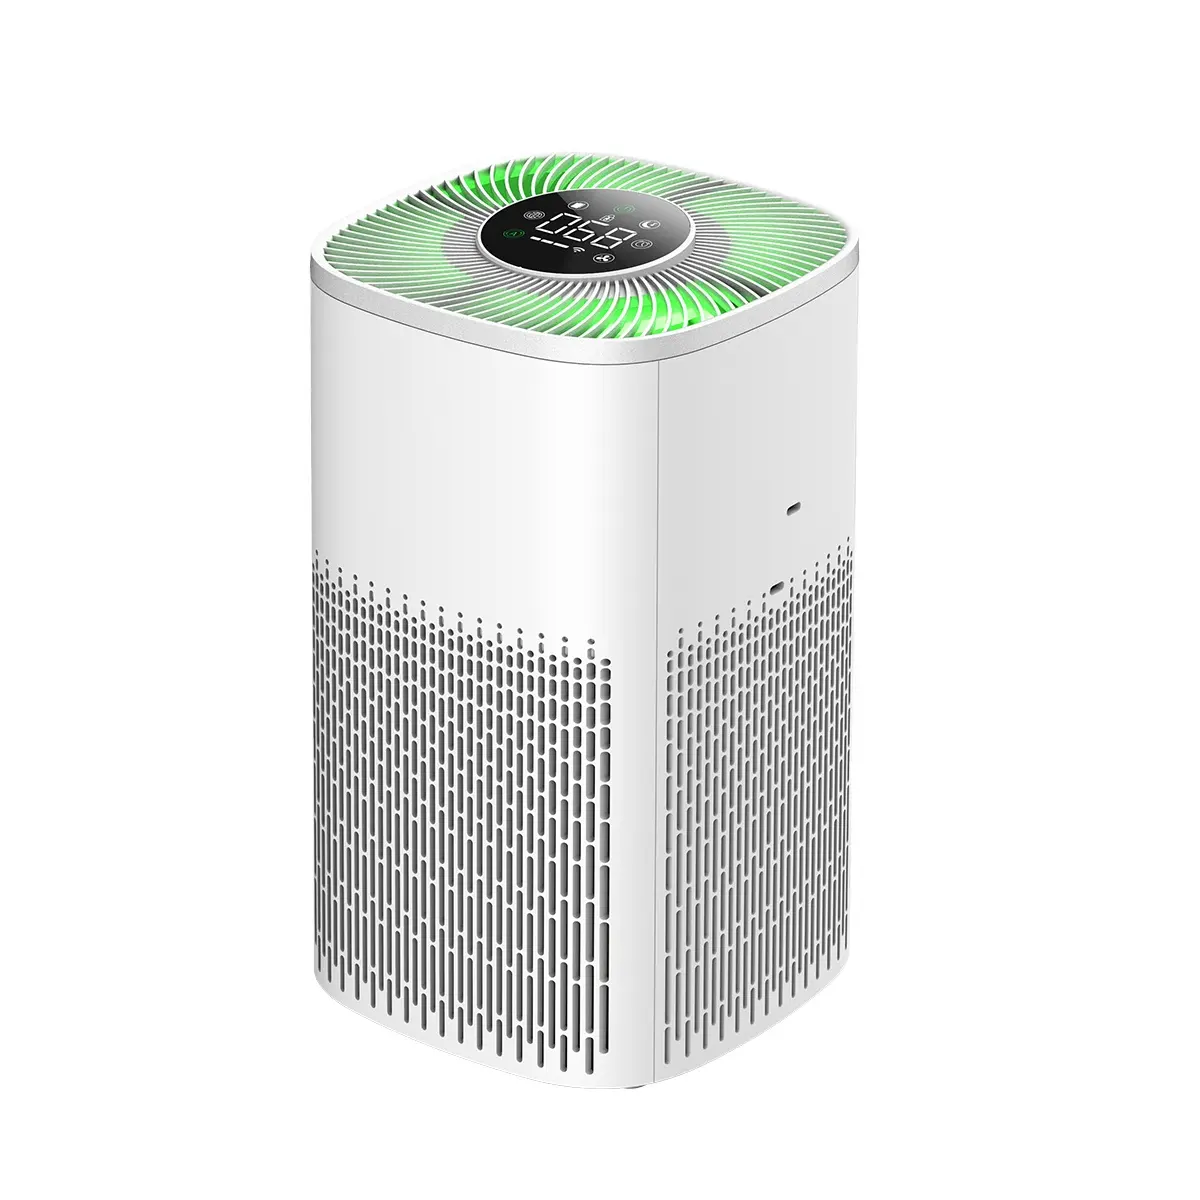 2023 New Multifunctional Home Automation System Tuya Smart Wifi Air Purifier with Smart Life App Control PST-DN-905